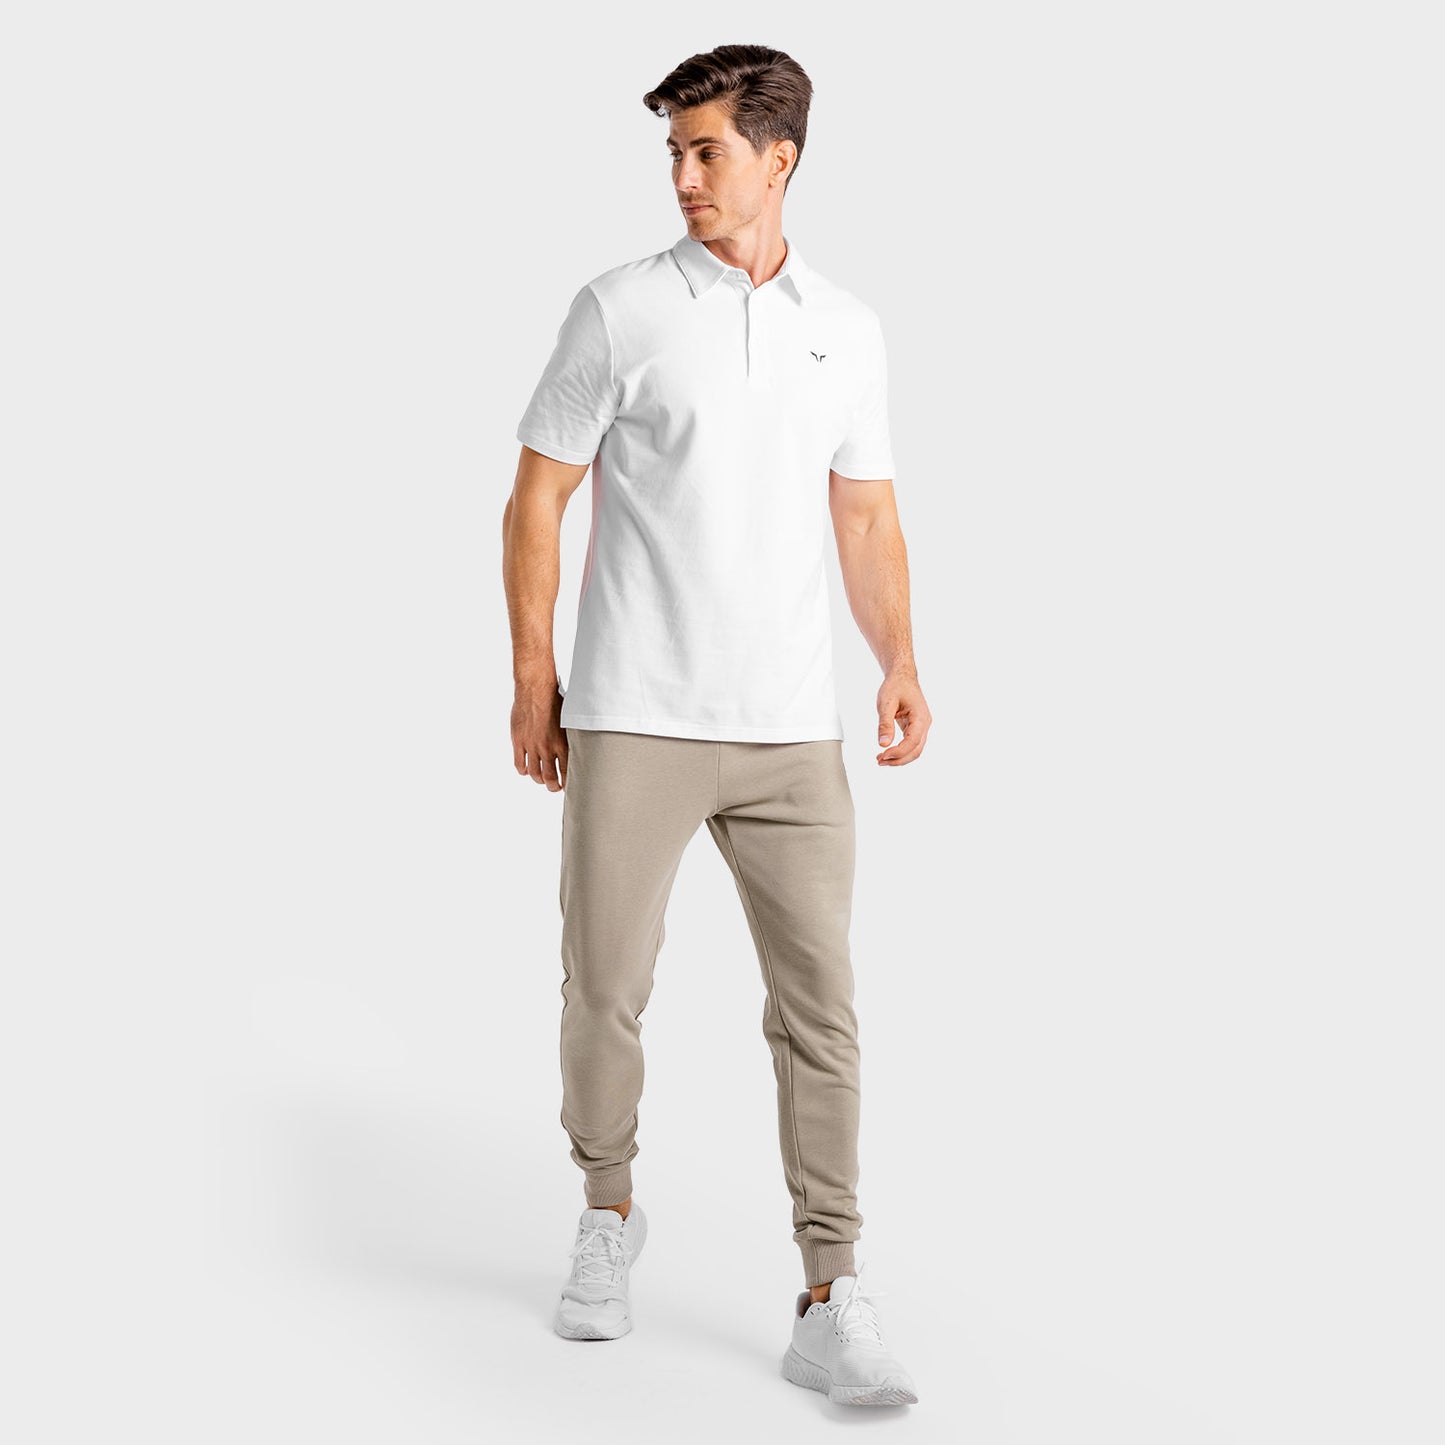 squatwolf-gym-wear-core-tee-polo-white-workout-shirts-for-men